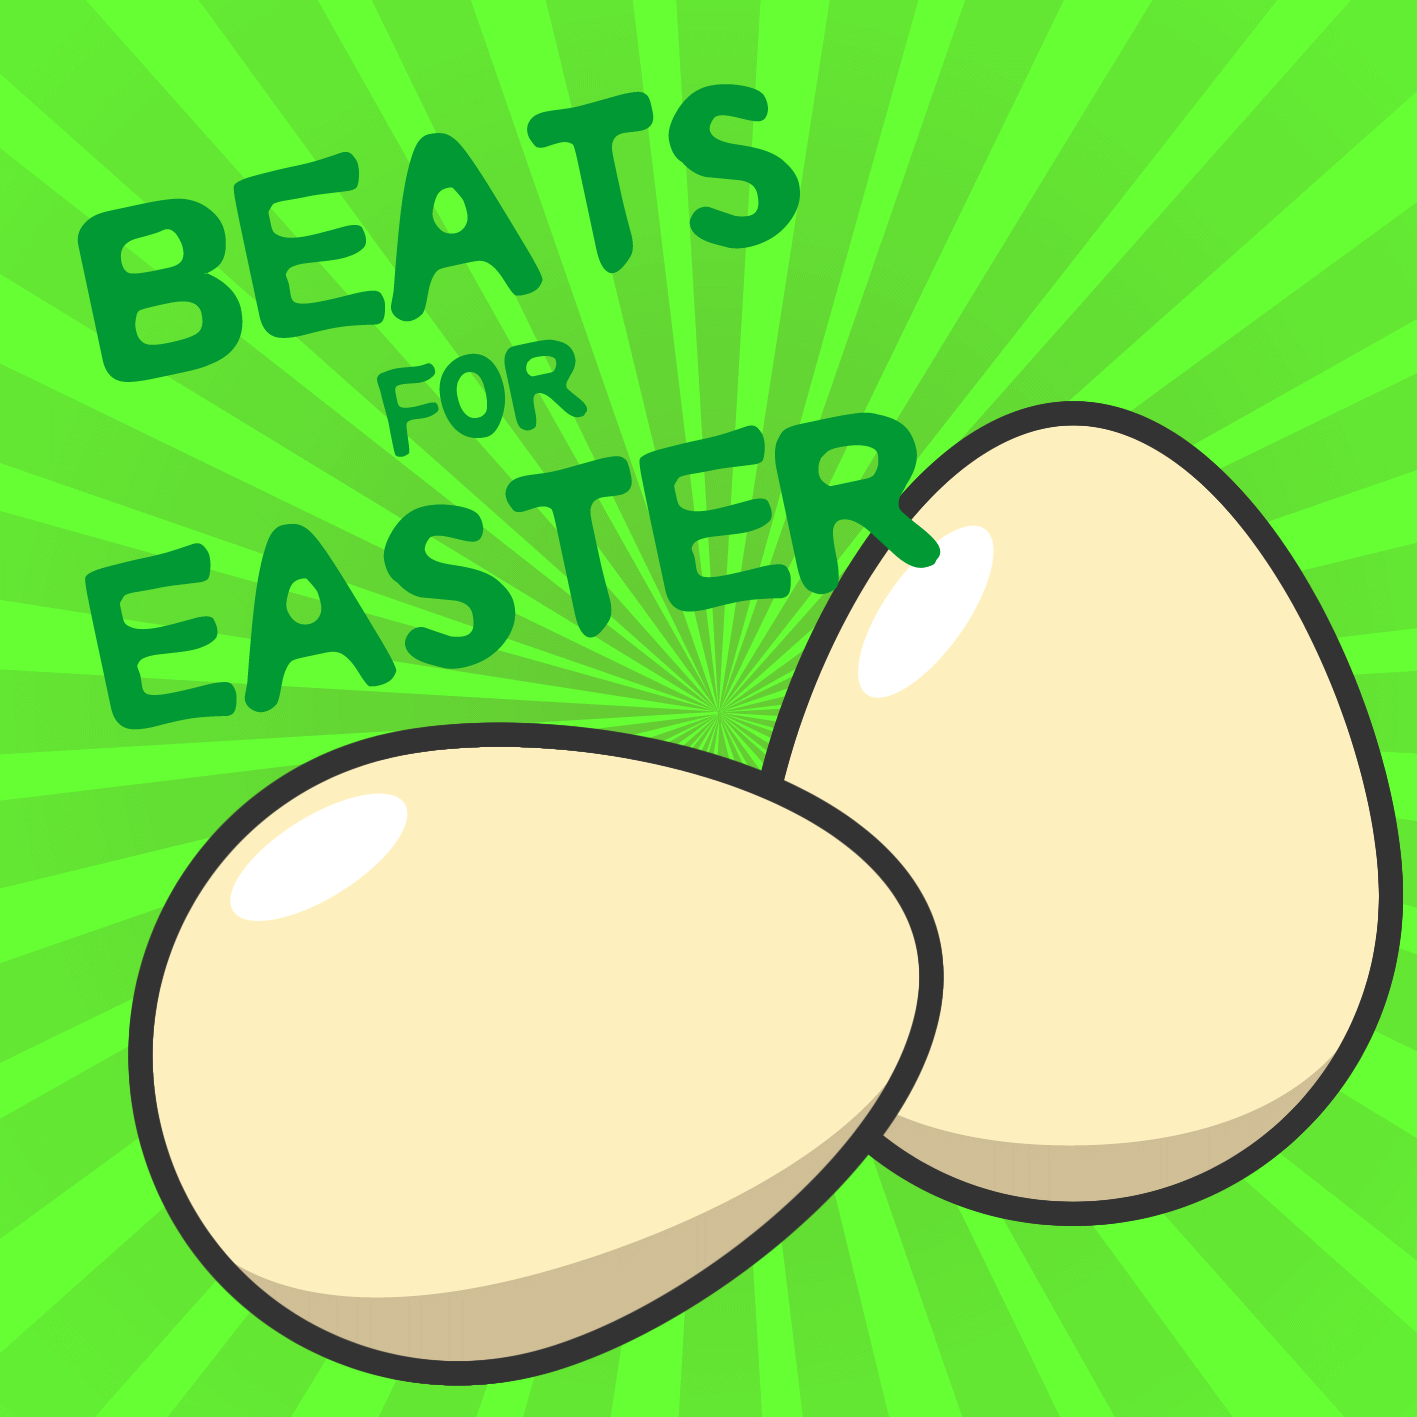 Beats For Easter